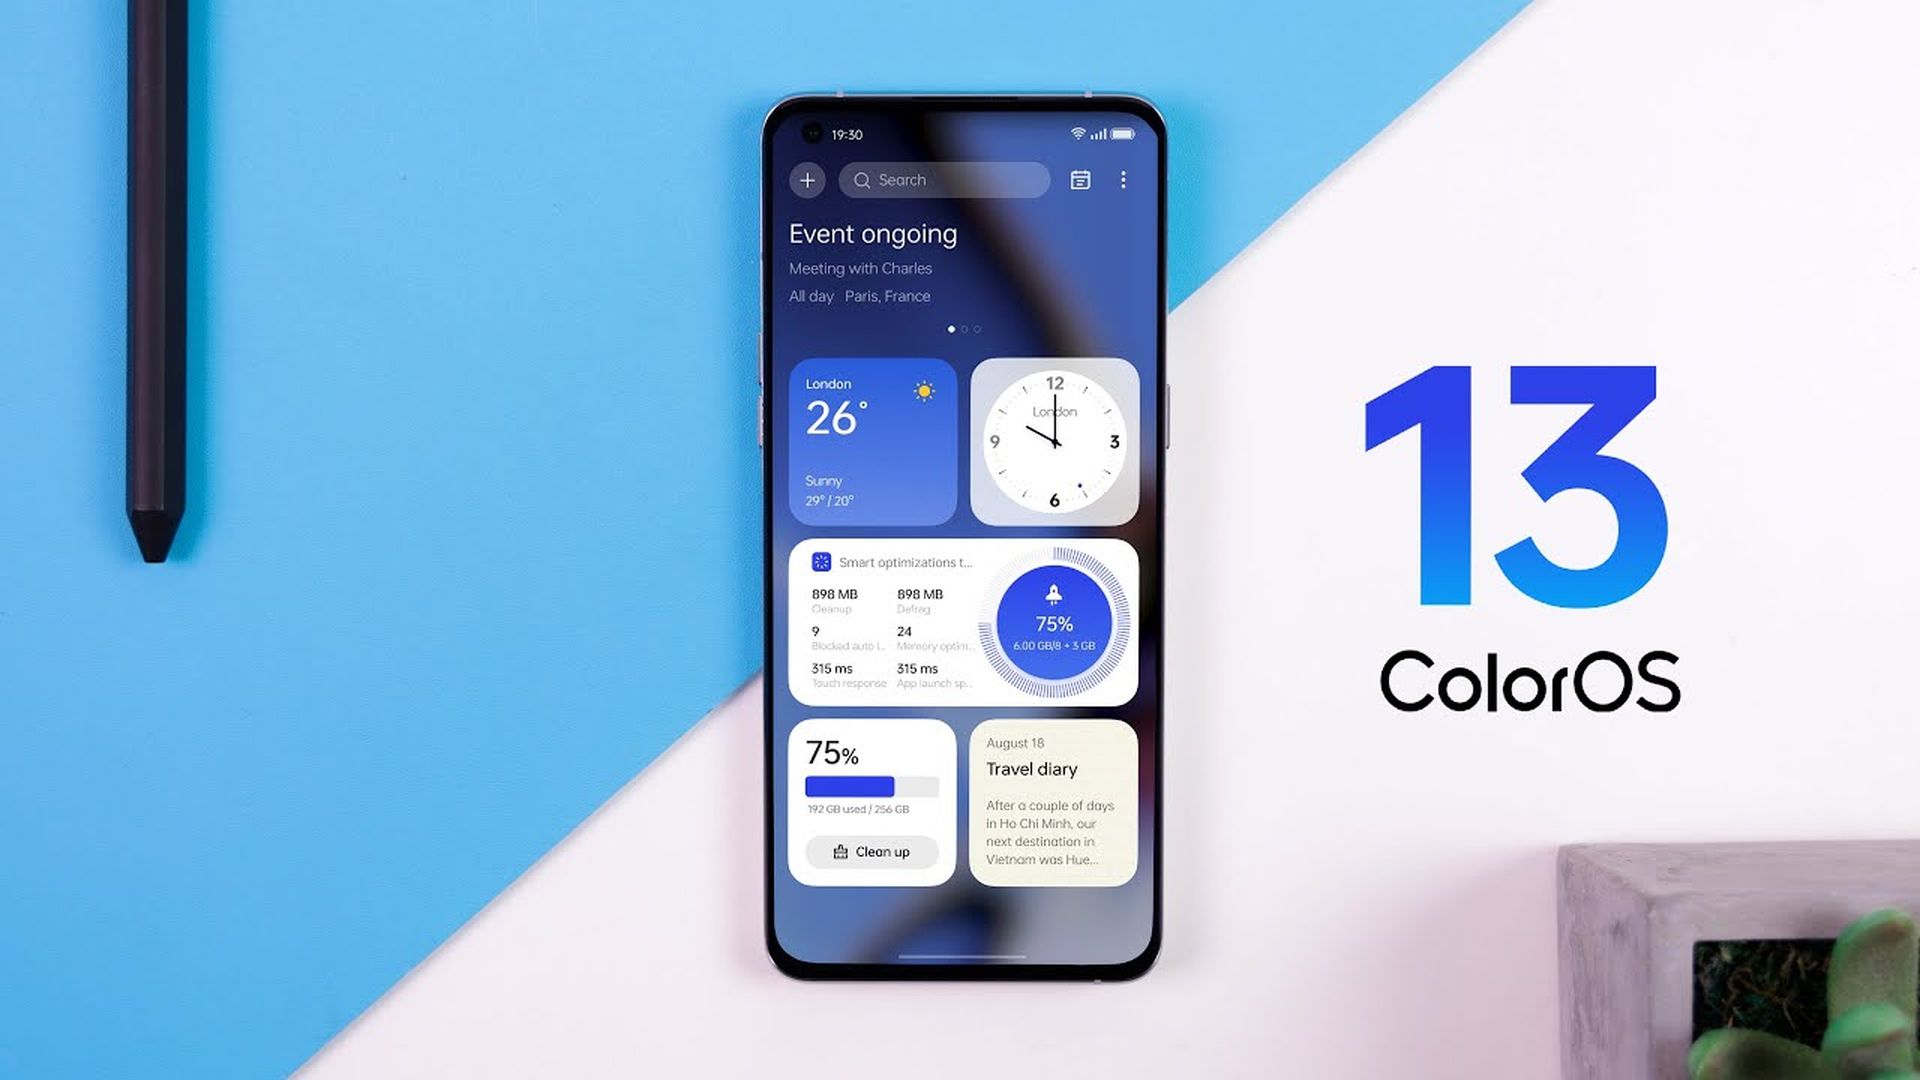 Today, we are going to be going over the new ColorOS 13 features and eligible Oppo devices, which is coming thanks to the latest stable release of Android 13.